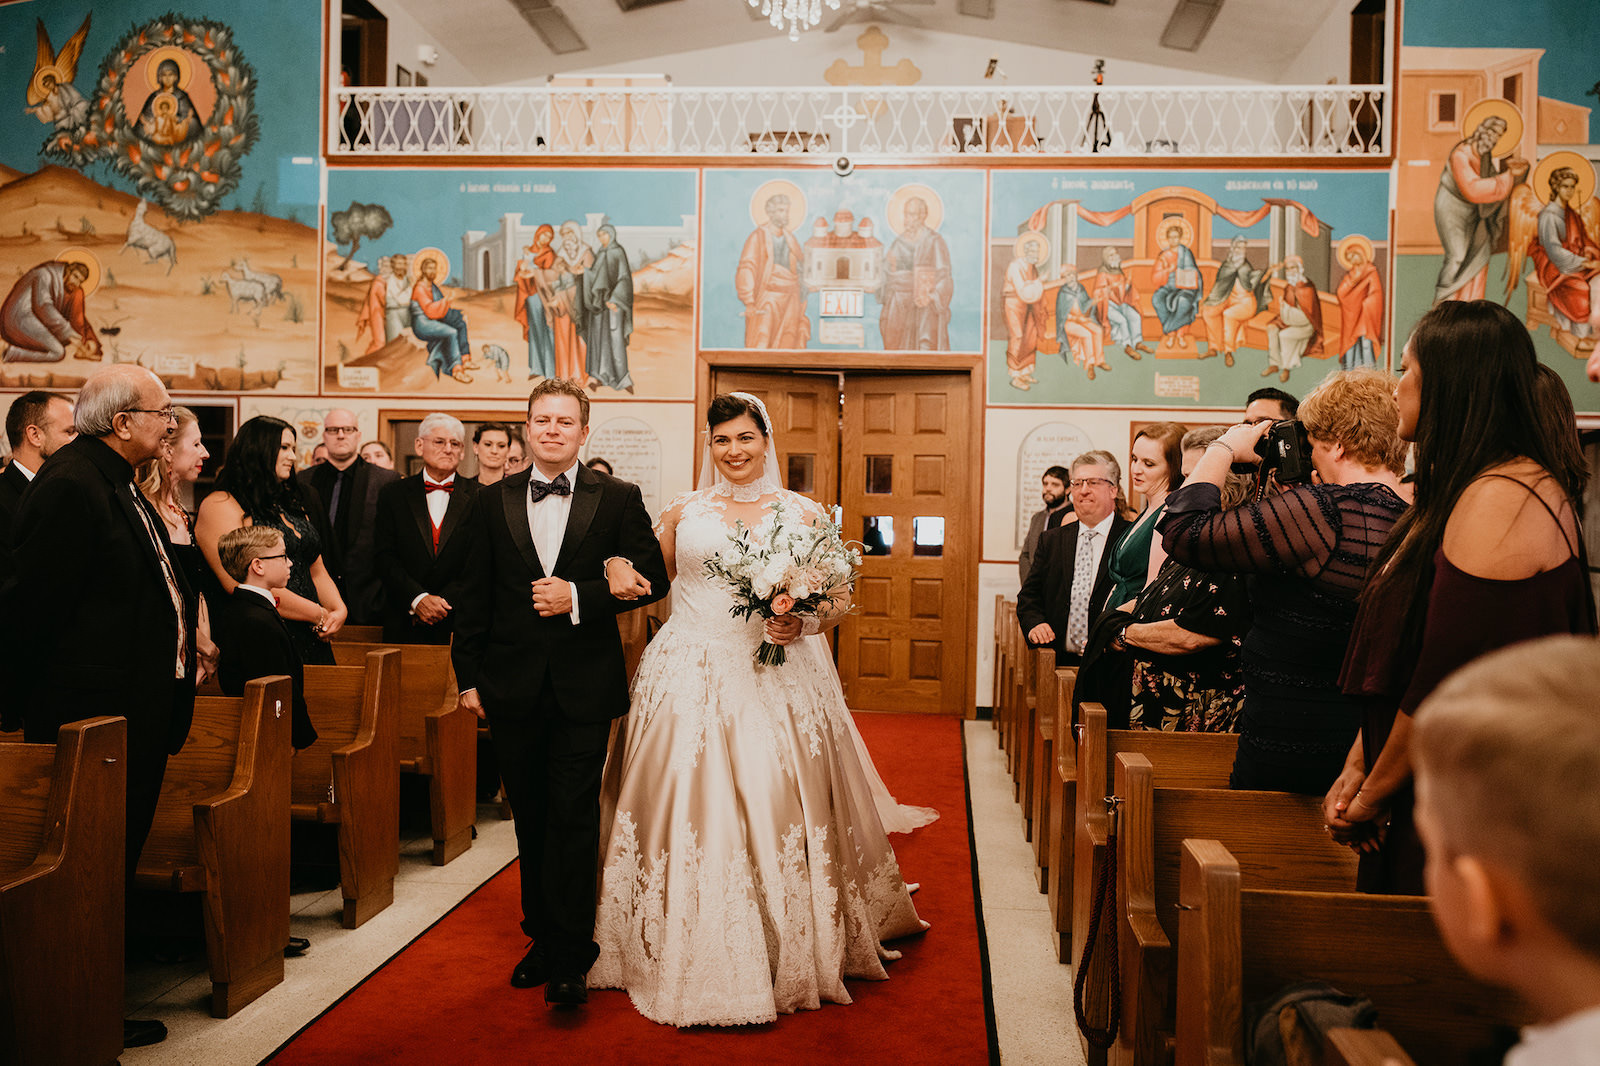 St. Petersburg Florida Traditional Greek Orthodox Church Wedding Ceremony | Bride Walking Down the Aisle Wearing a Champagne and Ivory Lace Allure Bridal Ball Gown with Sweetheart Neckline and Illusion Lace Bodice and Sleeves